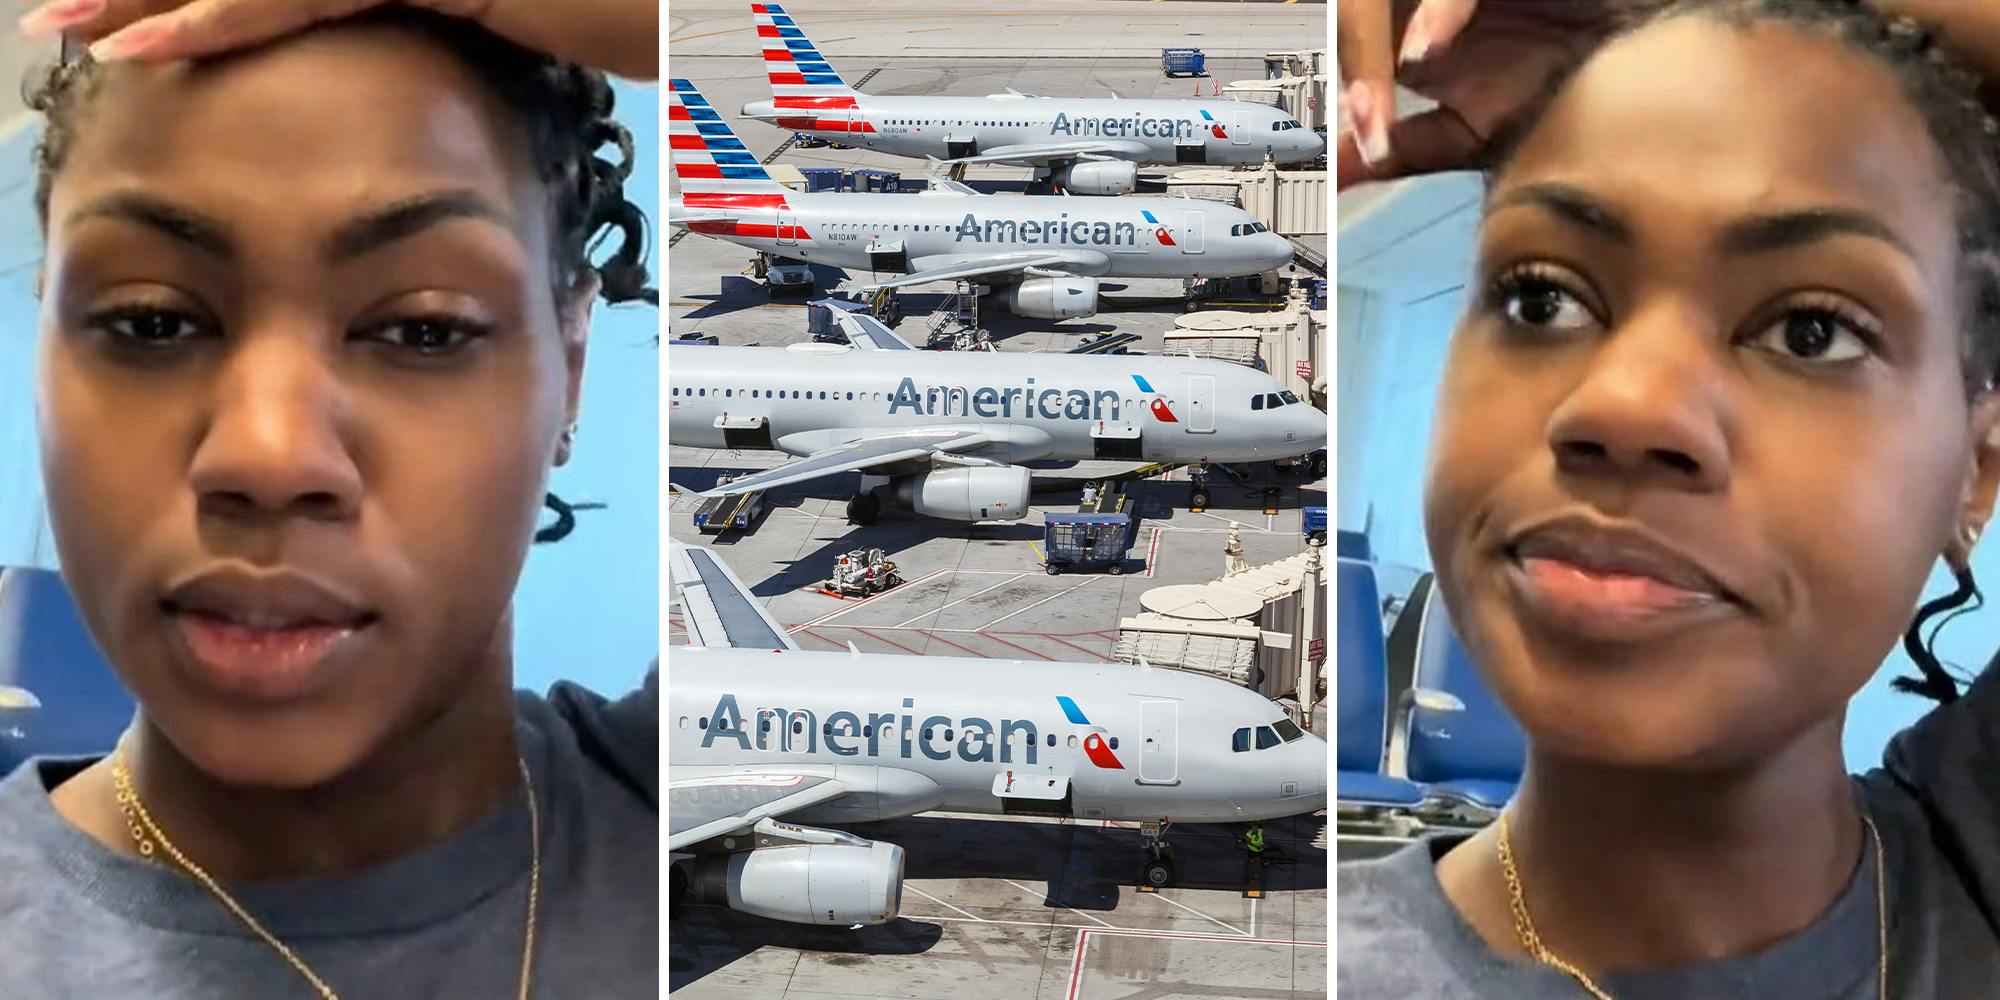 Black woman pays $600 to get seat upgraded. American Airlines gives it away to white woman